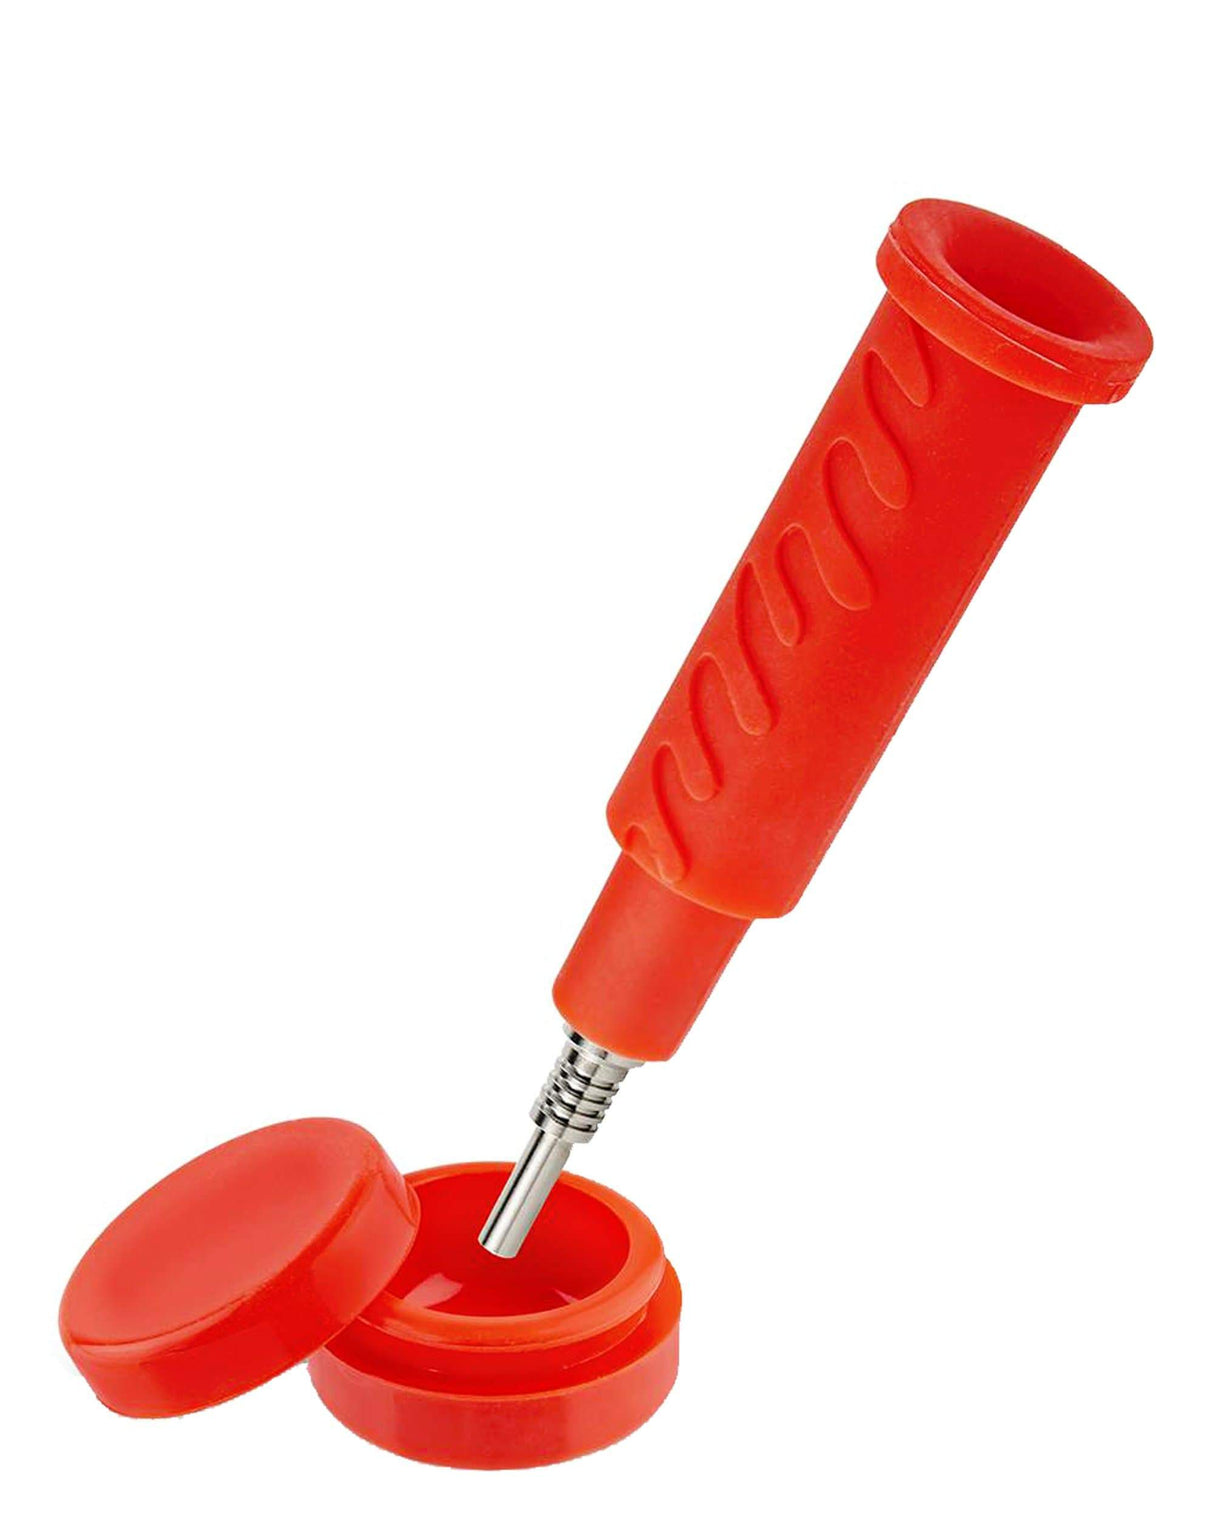 Ooze Cranium Bong & Dab Rig in red with titanium nail, silicone body, side view on white background